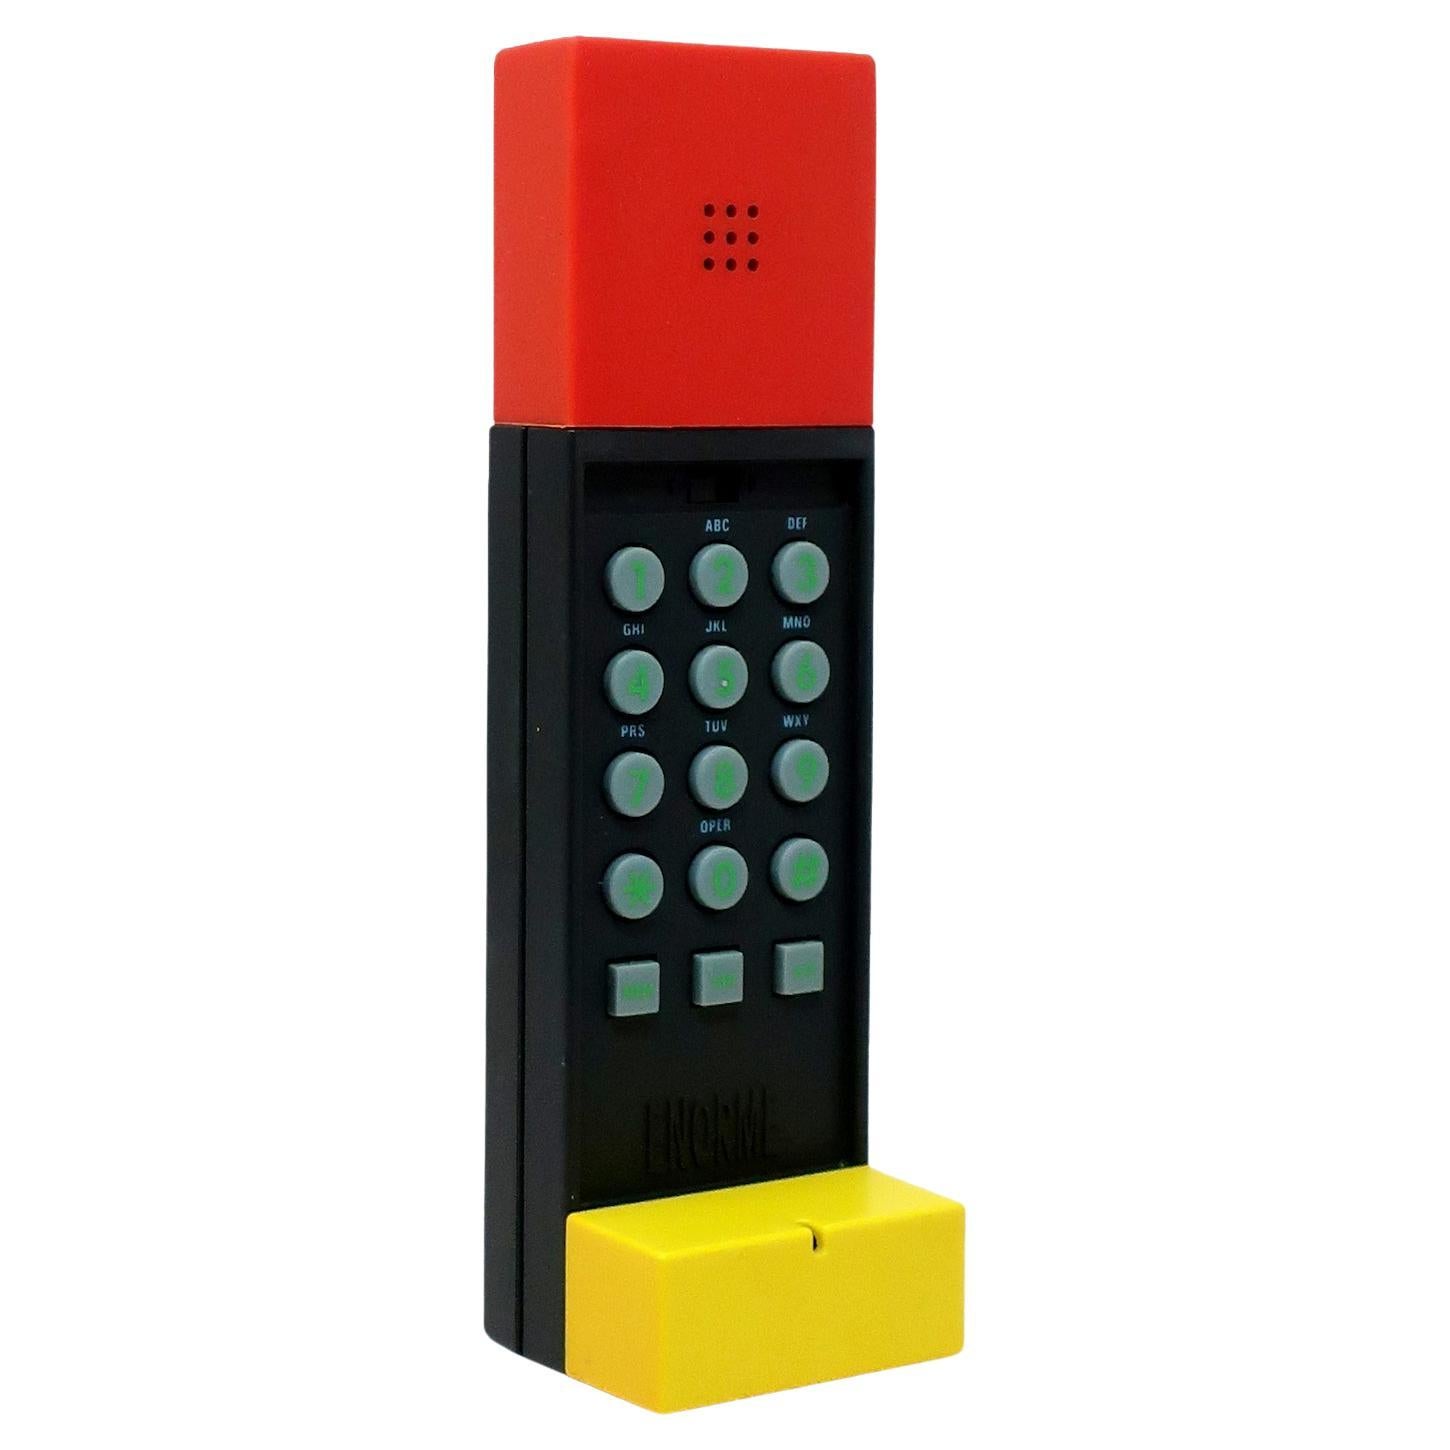 1986 Enorme Telephone Handset by Ettore Sottsass For Sale